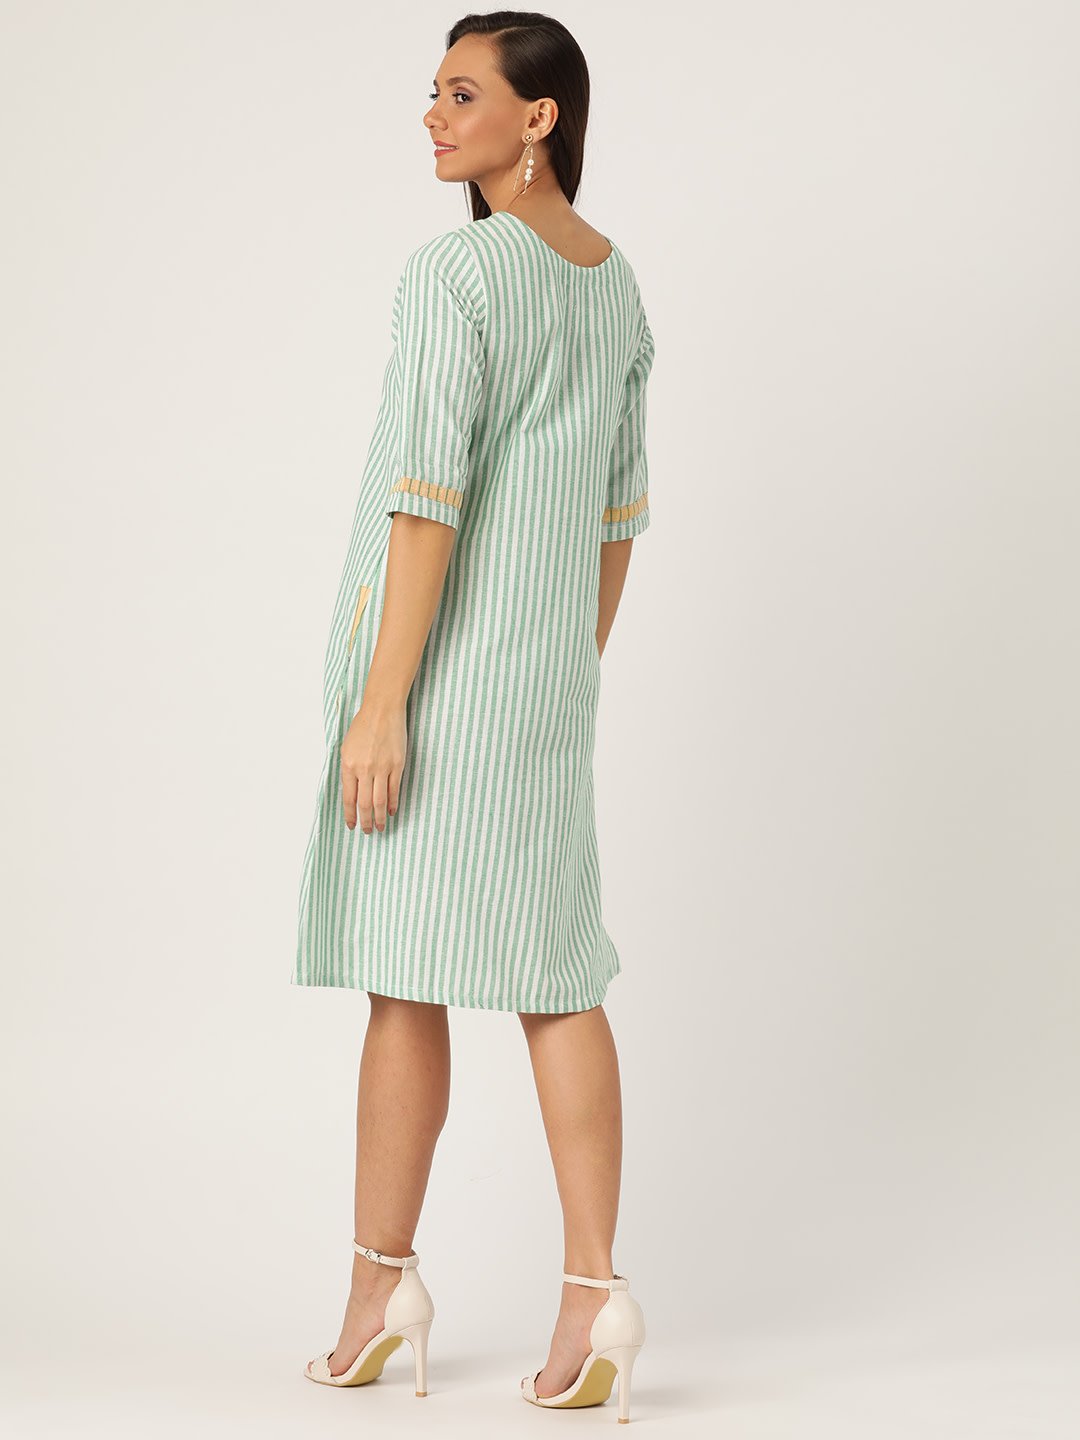 GREEN AND WHITE STRIPES DRESS